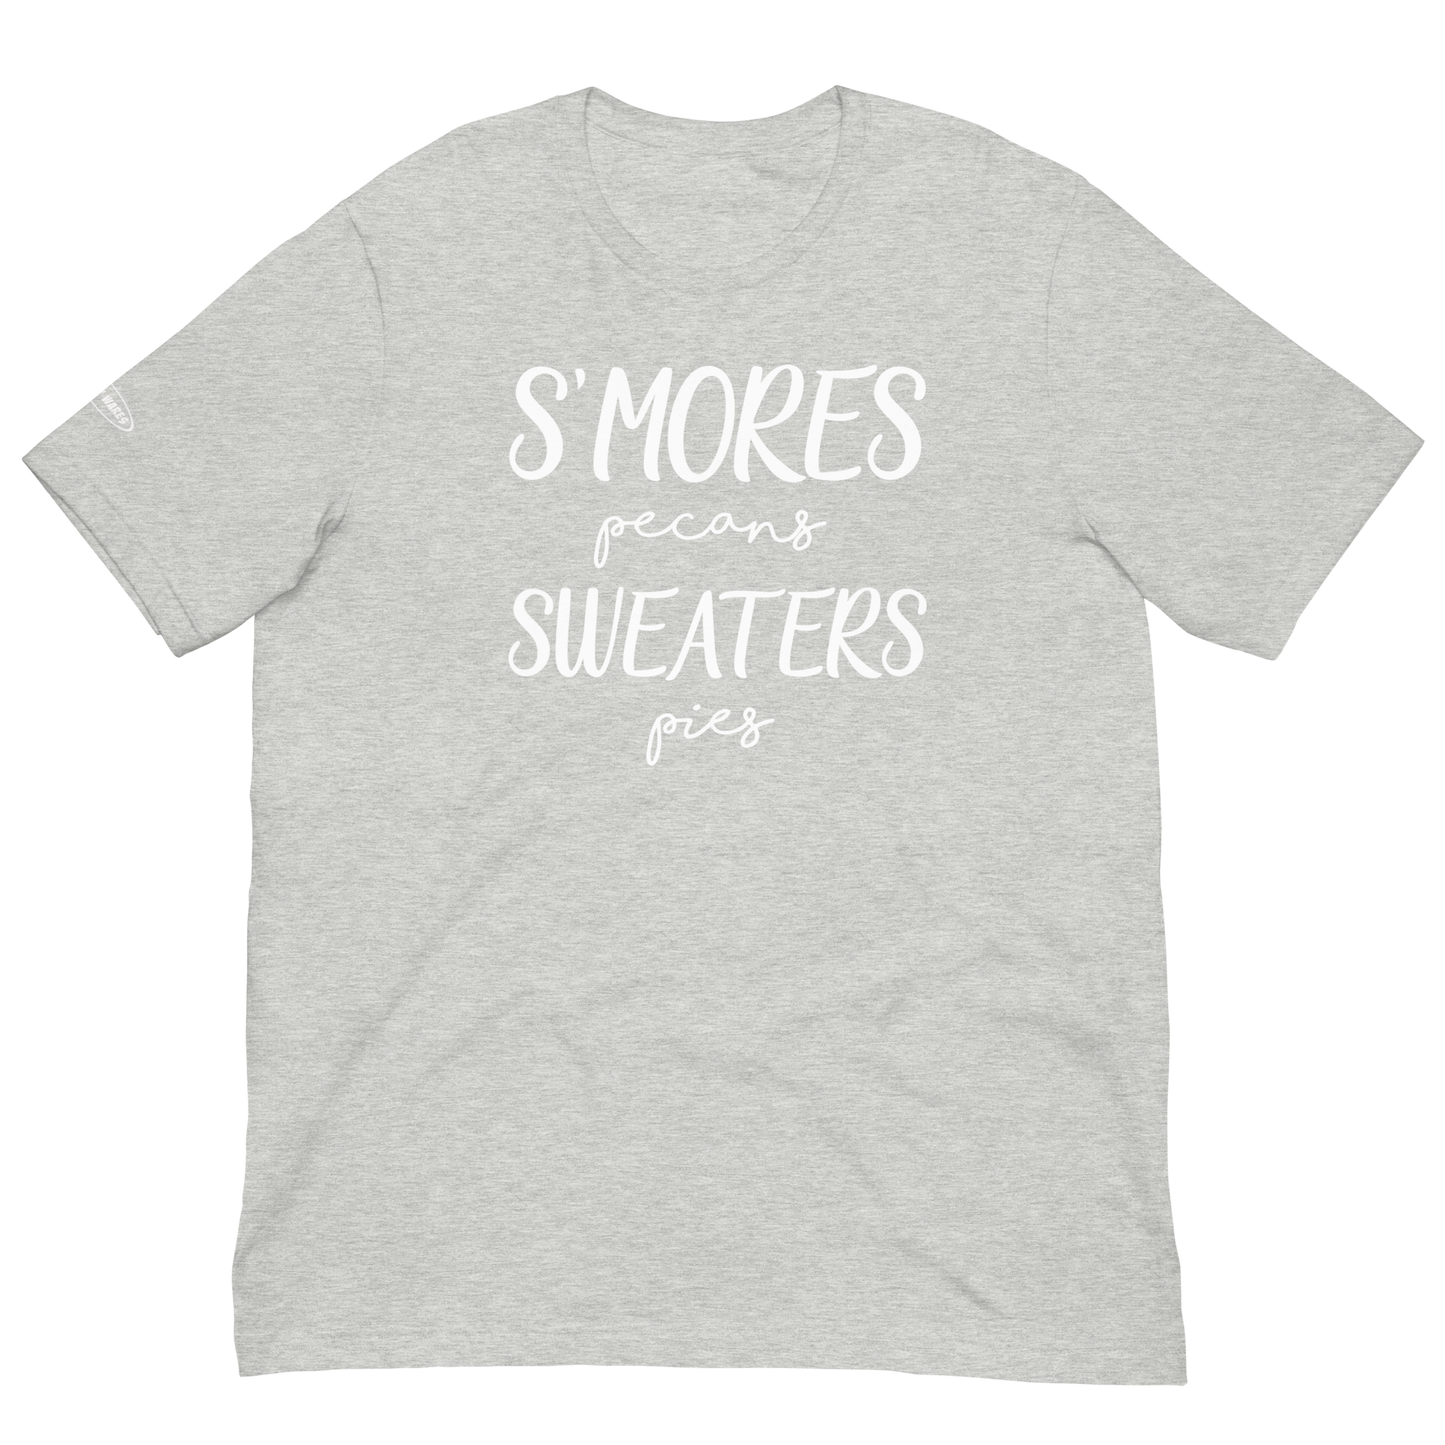 Unisex - Fall Smores, Pecans, Sweaters and Pies - Fun T-shirt